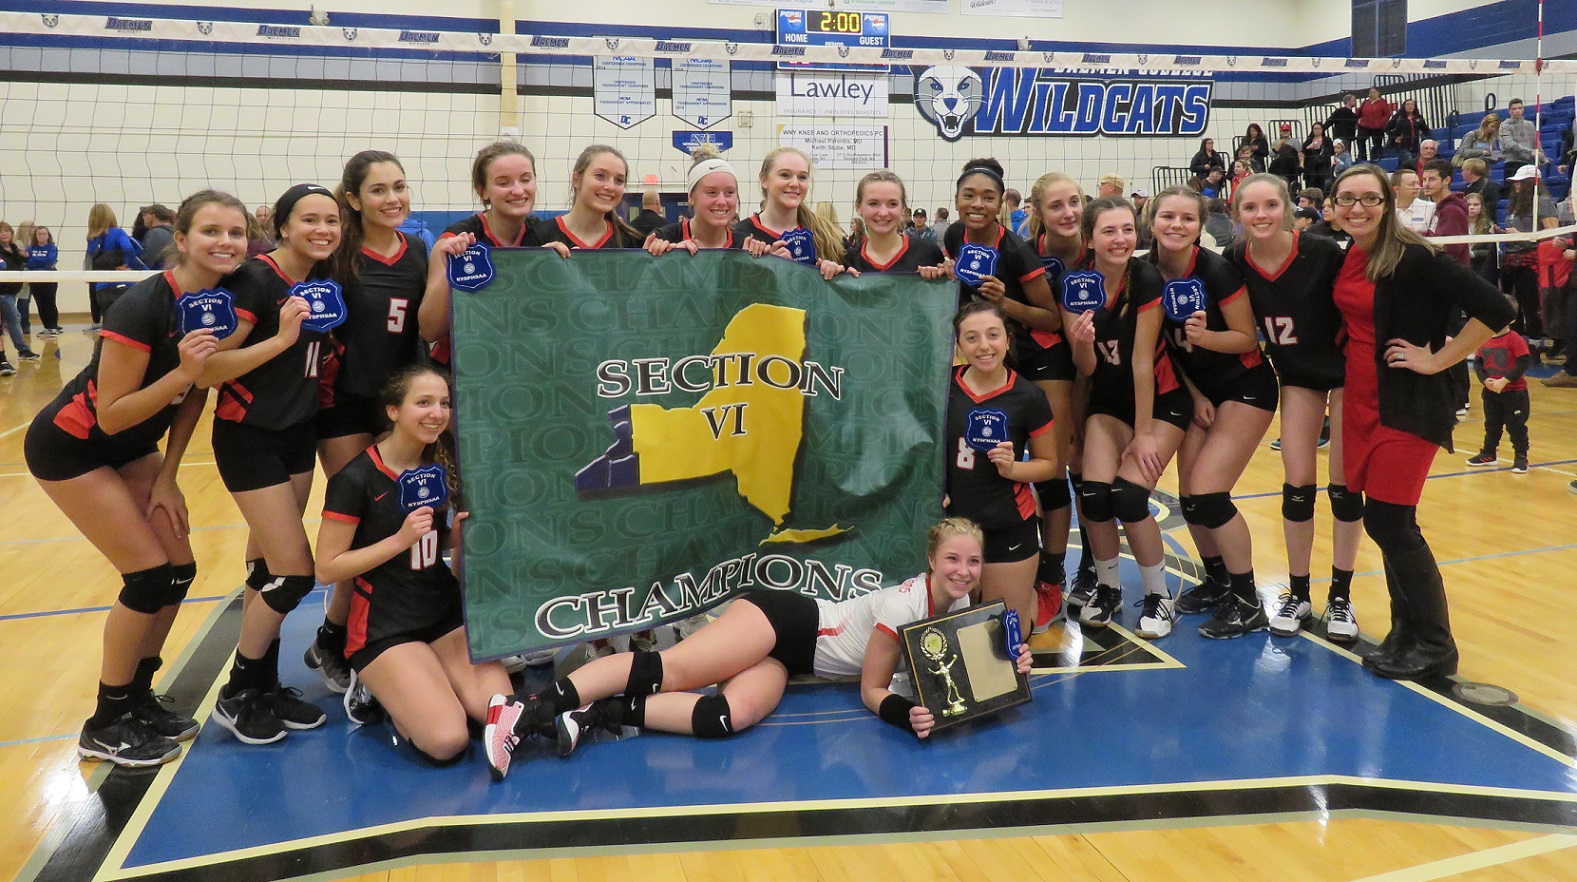 The Niagara-Wheatfield Falcons pose following the team's Class A Section VI championship. (Photos by David Yarger)